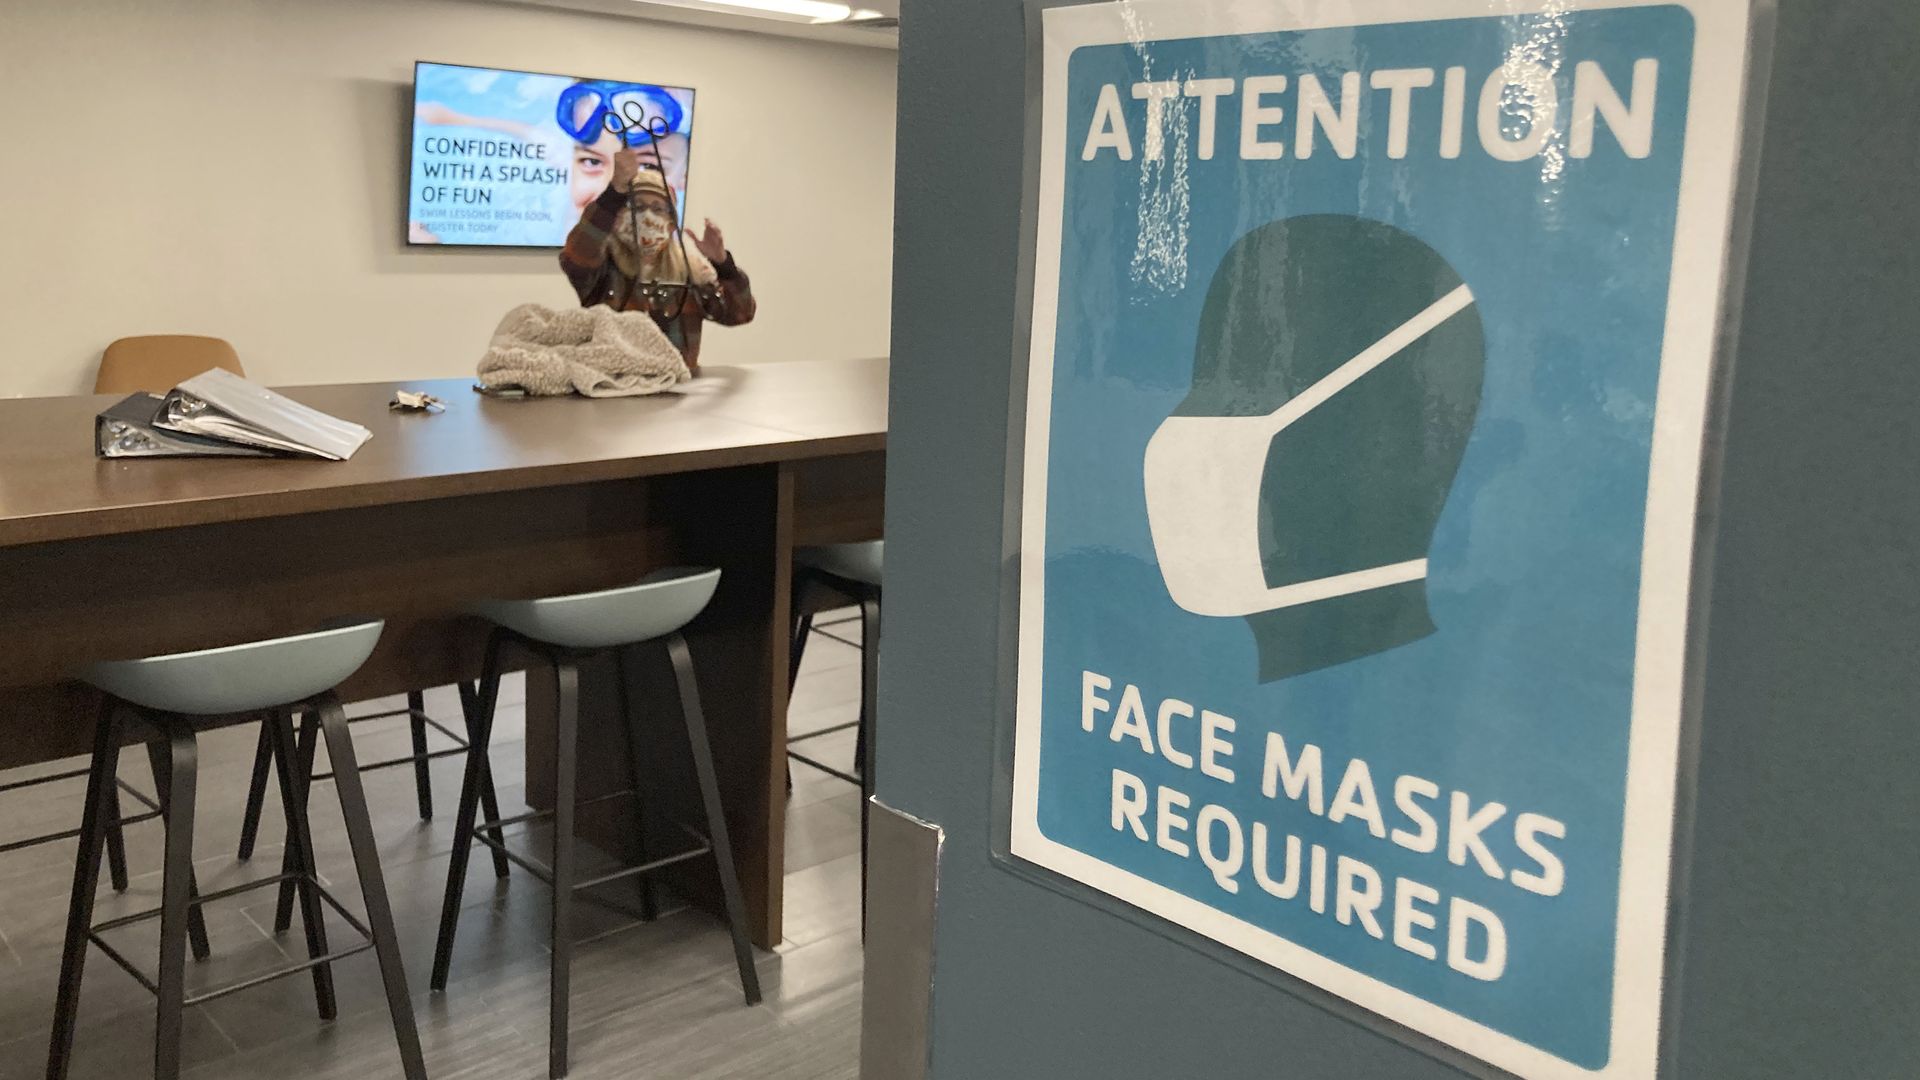  A sign advises members at the YMCA that face masks are now required to wear after a Denver public health order went into effect Nov. 24. Photo: David Zalubowski/AP